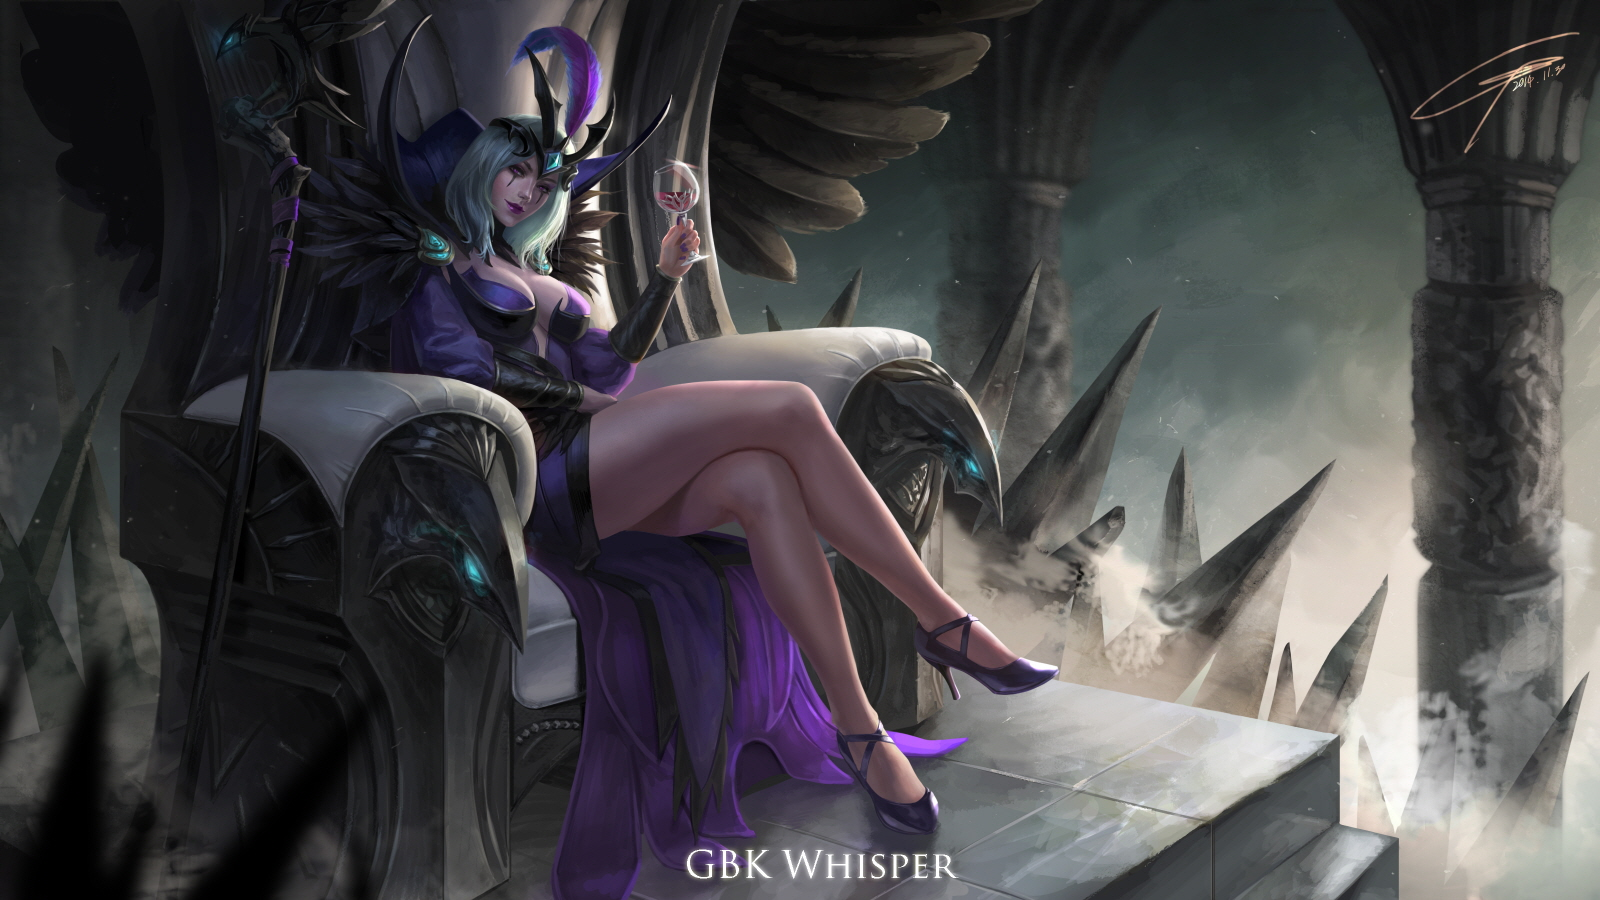 General 1600x900 video games video game girls magician staff League of Legends LeBlanc (League of Legends) fantasy art cleavage boobs legs legs crossed heels PC gaming video game art drinking glass purple heels fantasy girl